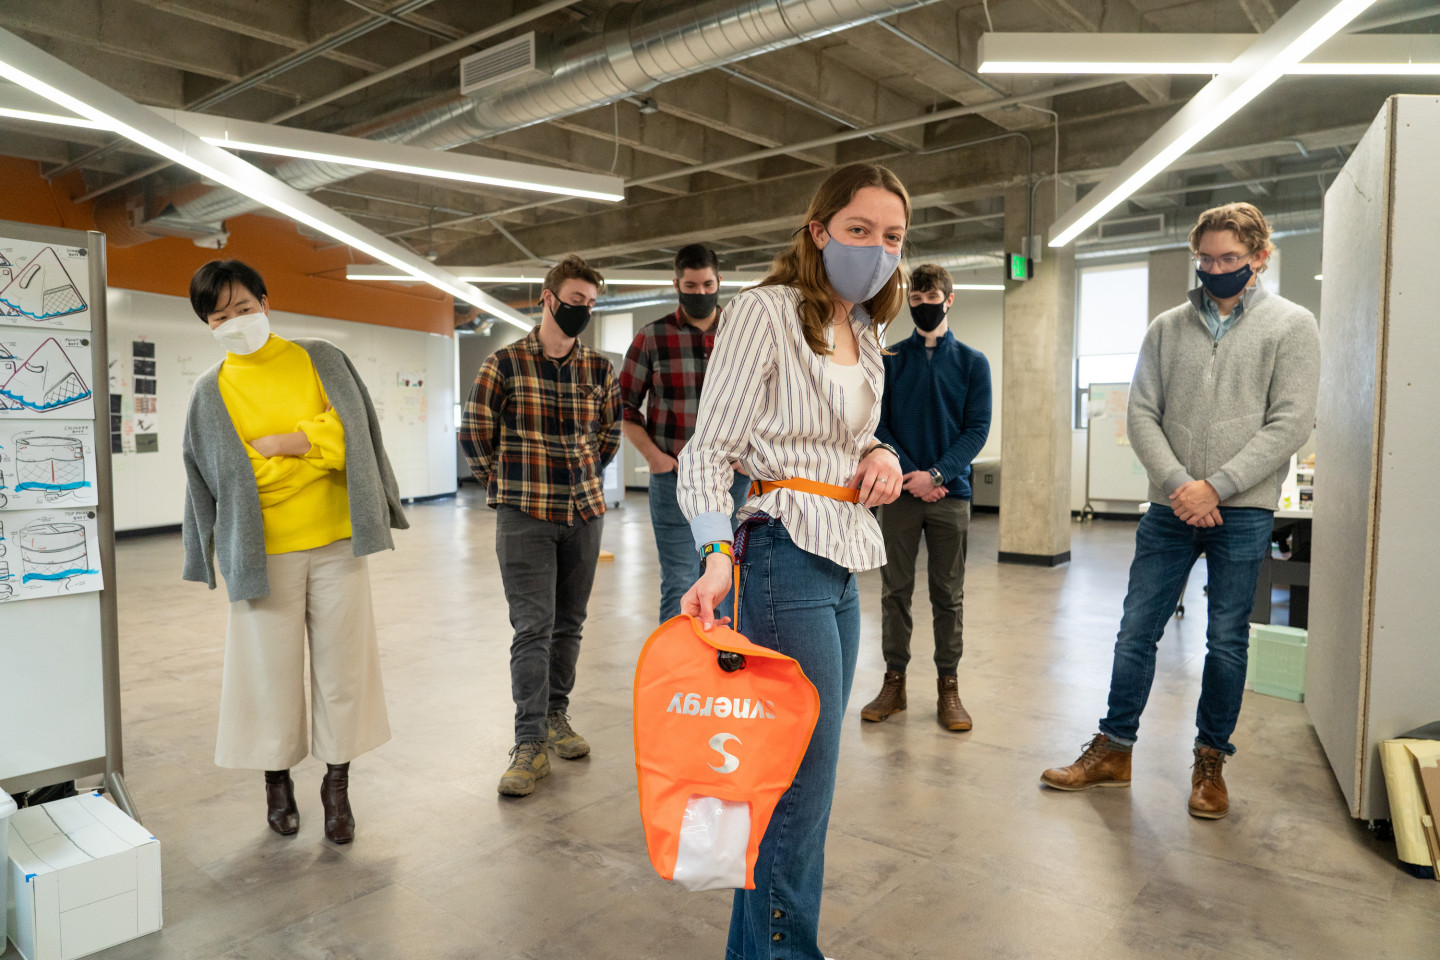 A student holds an orange bag that is tethered to her waist.